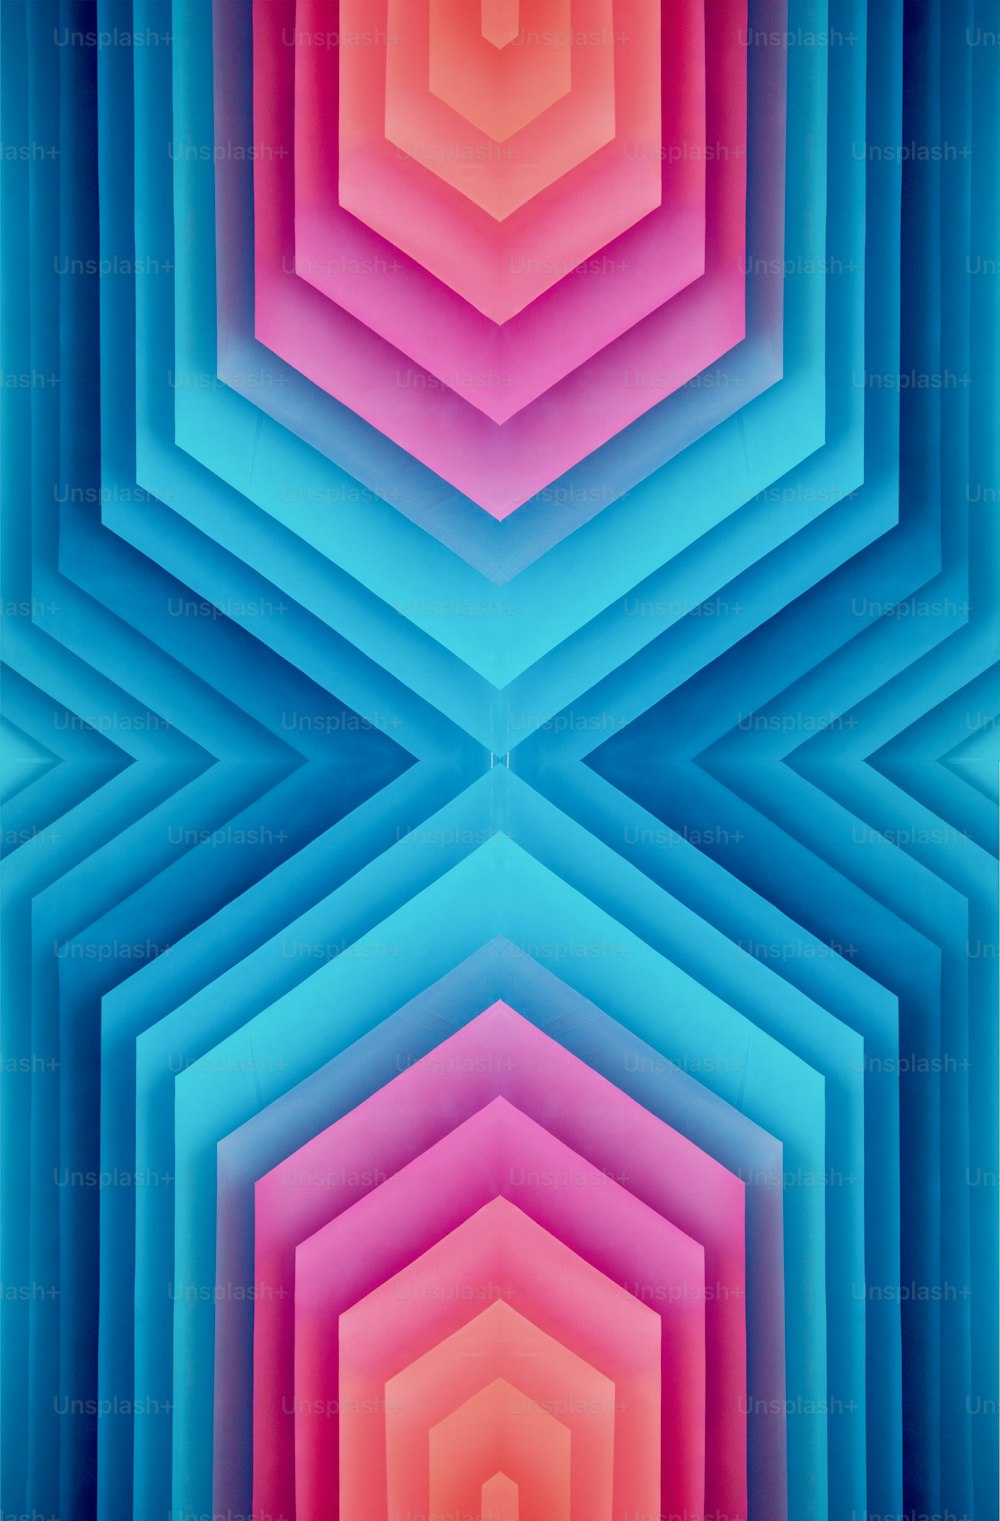 a colorful background with a hexagonal pattern